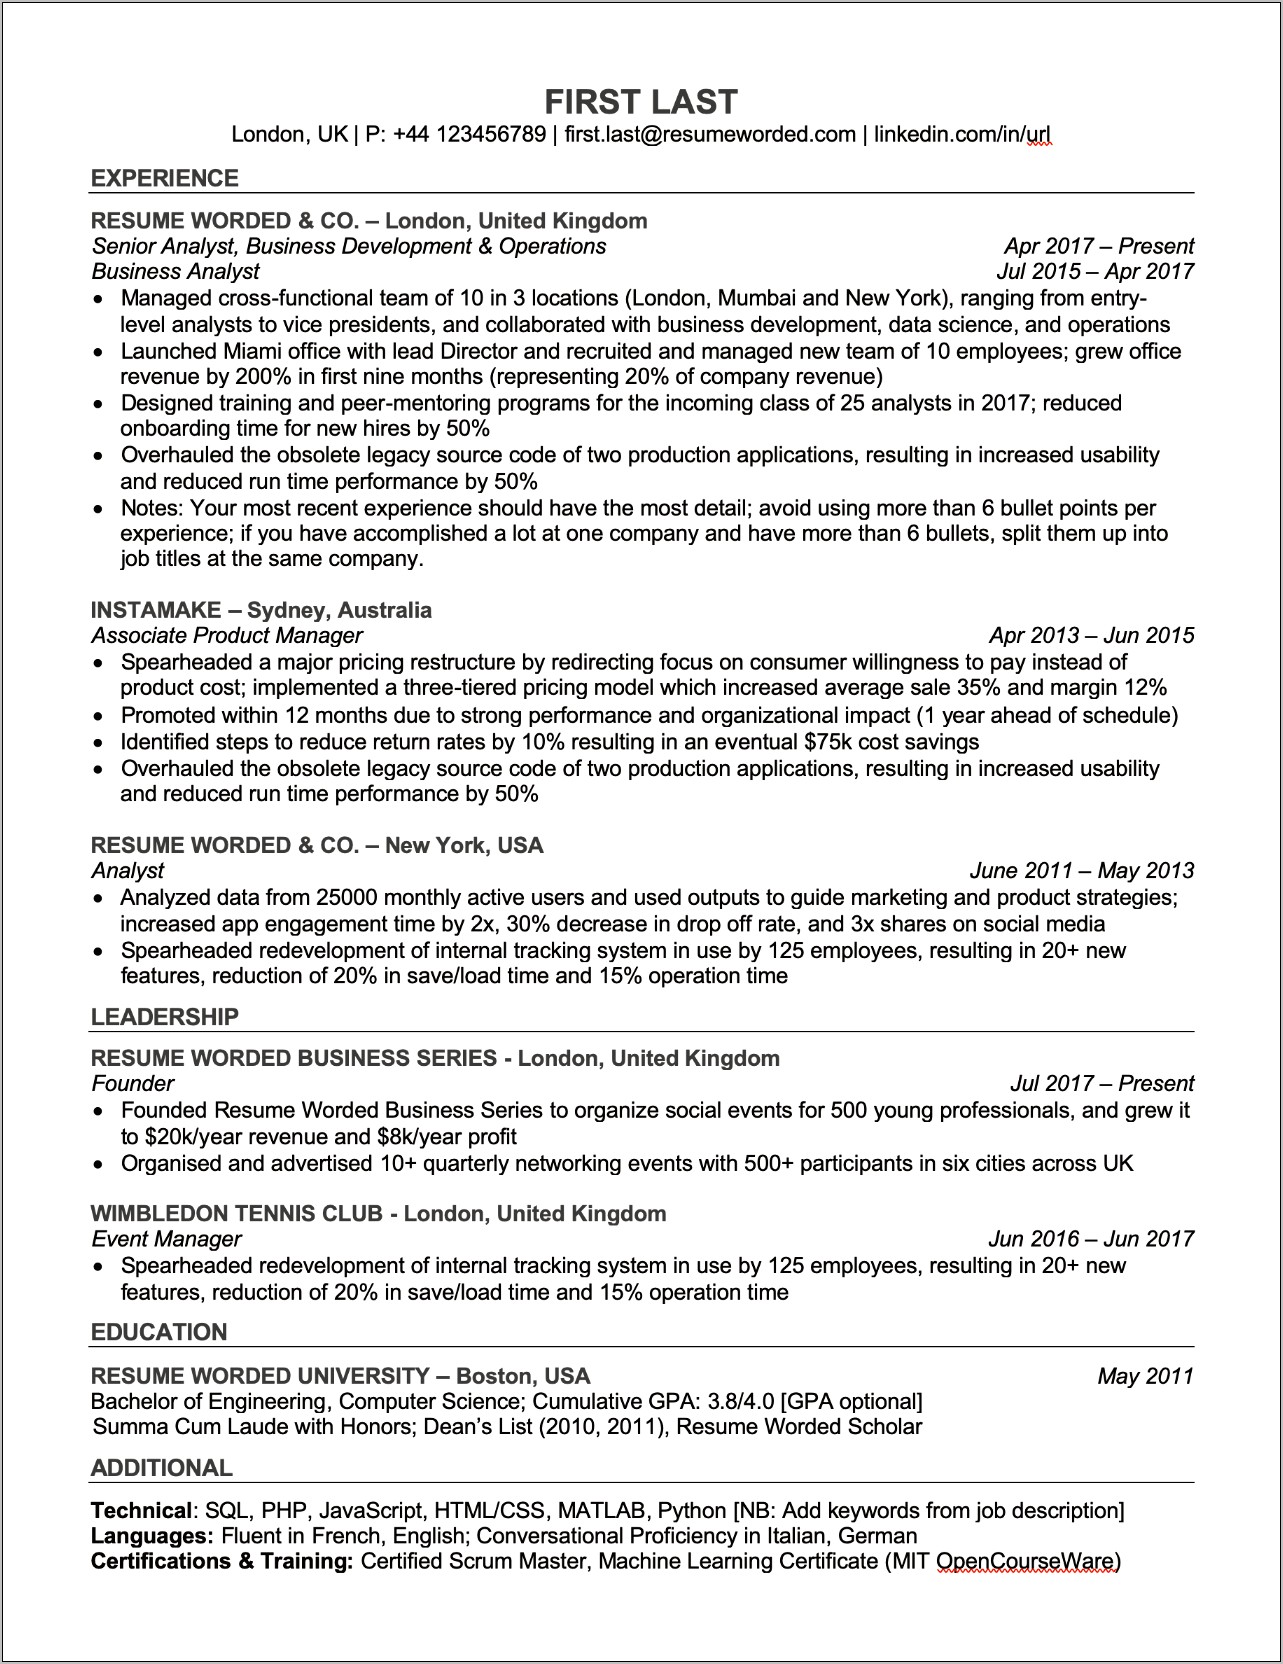 Download Sample Resume Format For Experienced It Professionals